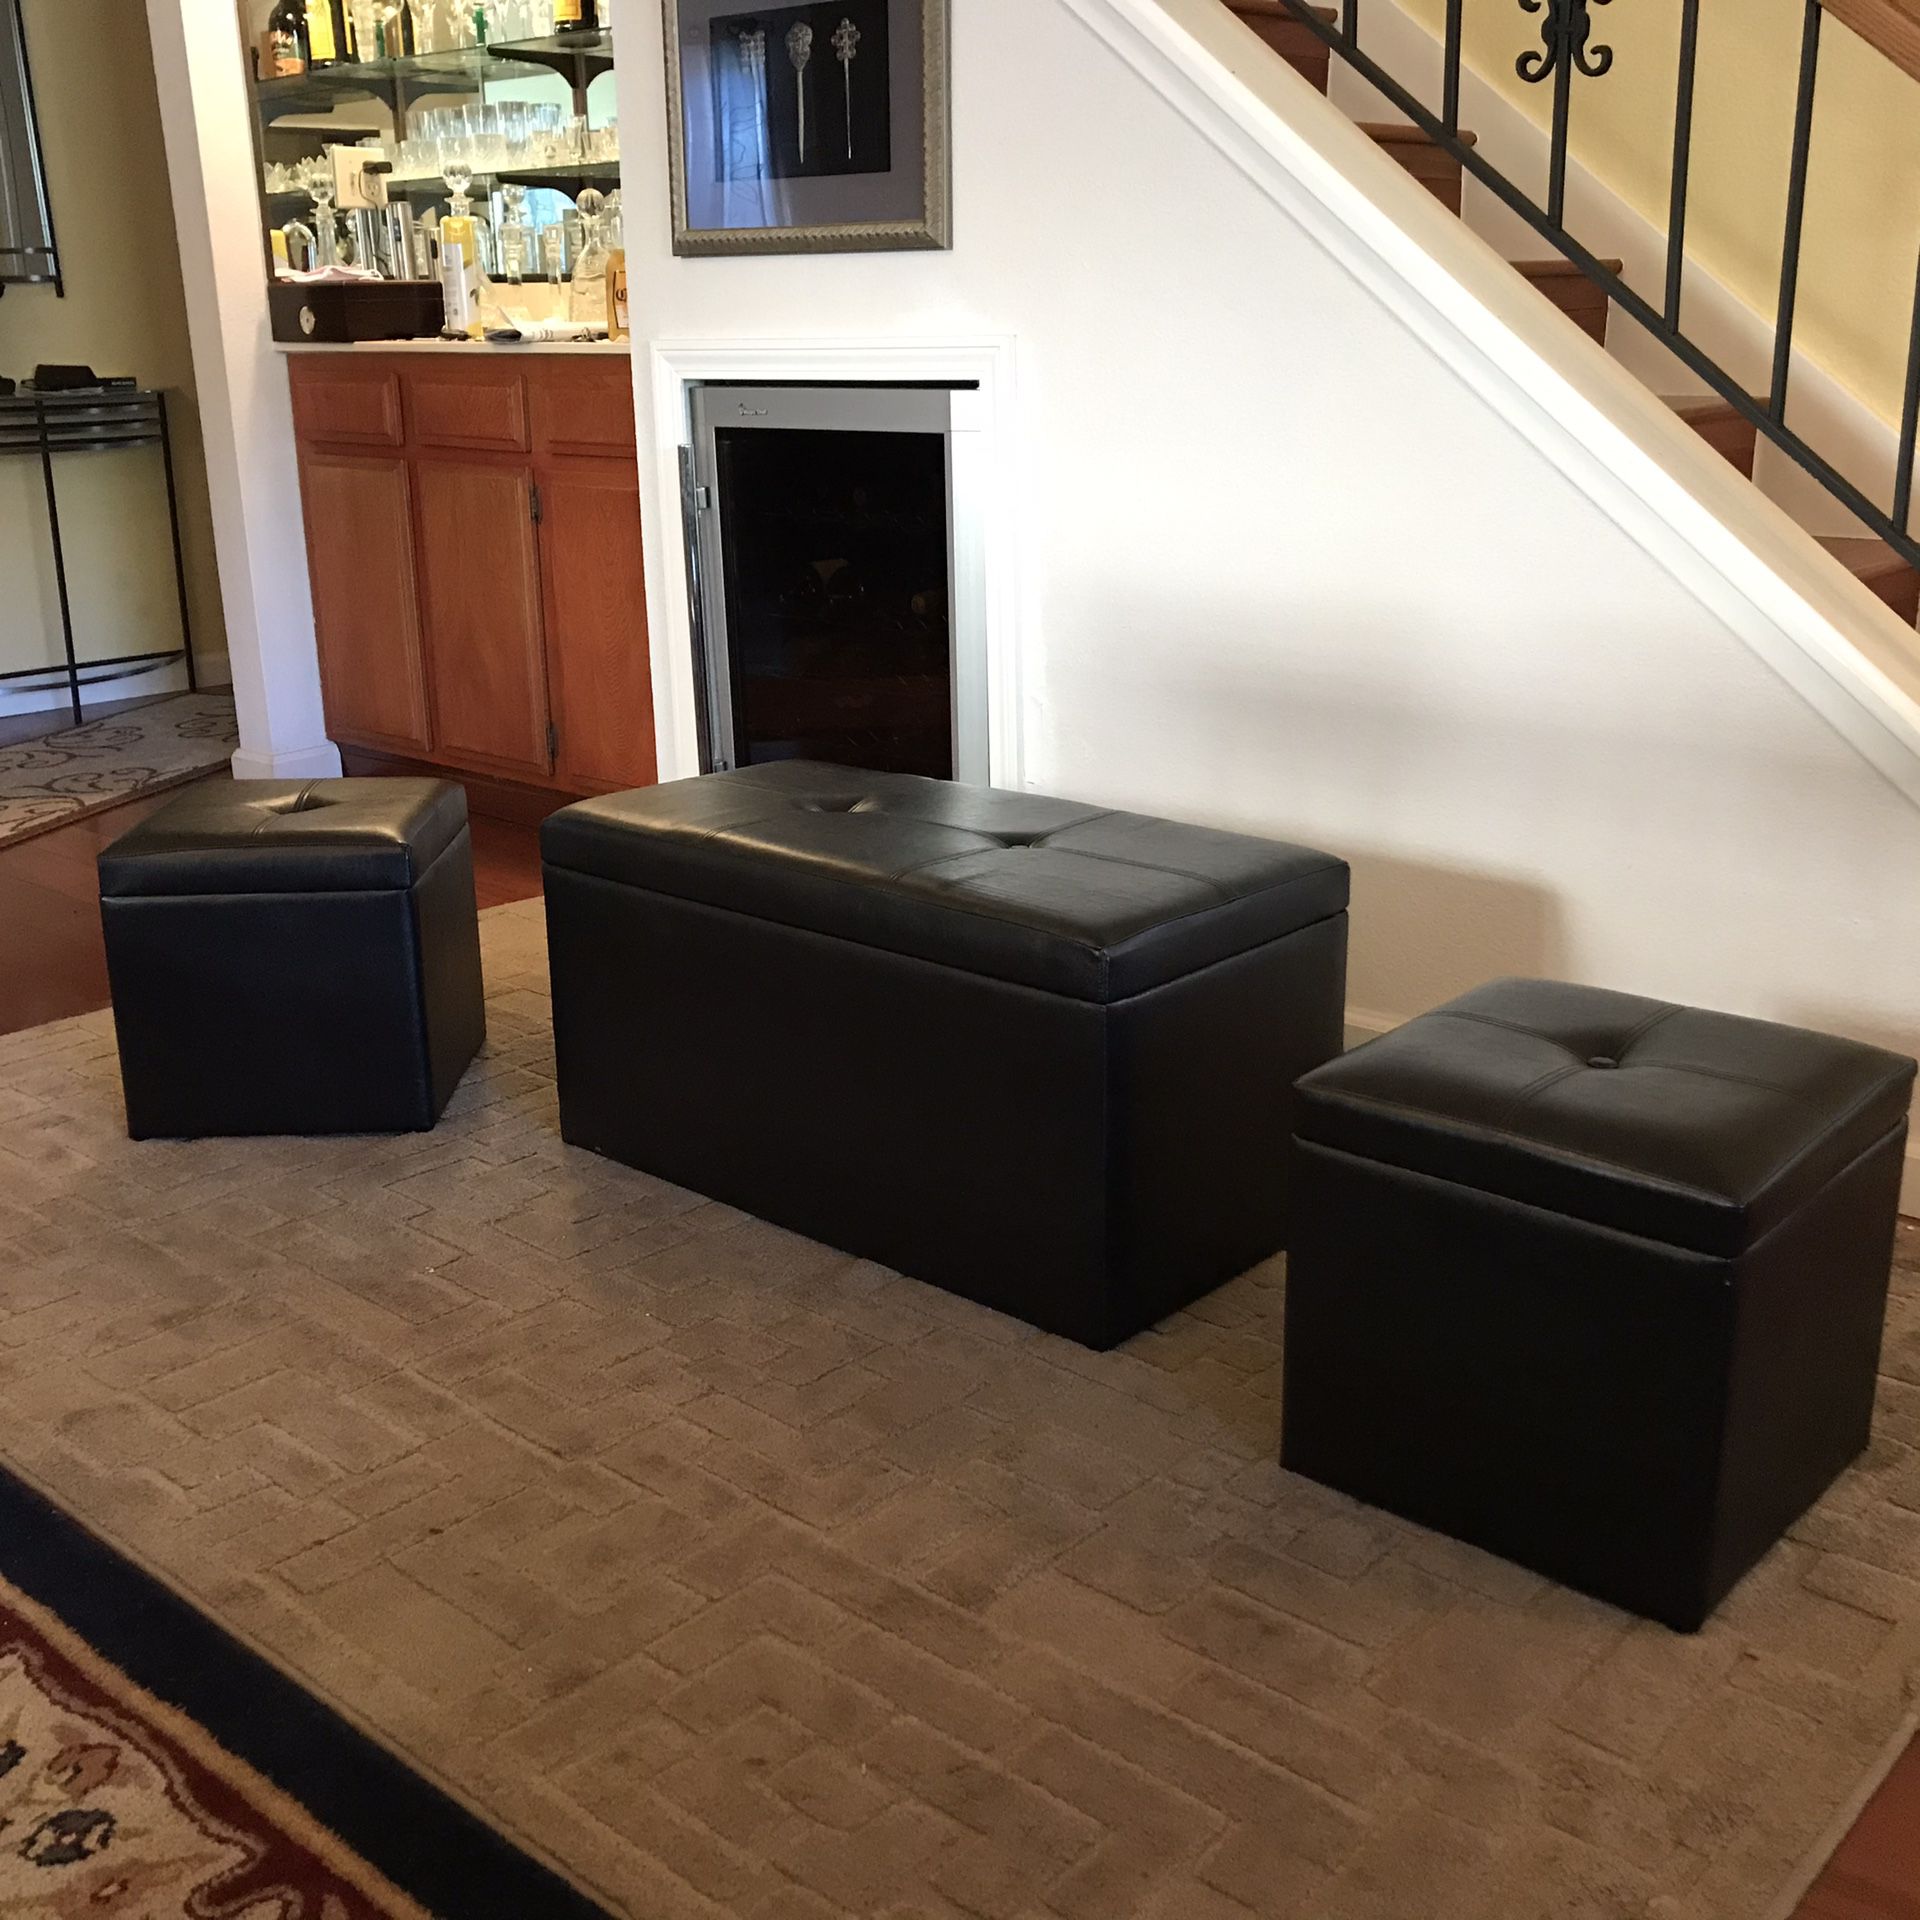 Brand new 3 pc storage ottoman set. Free curbside delivery included